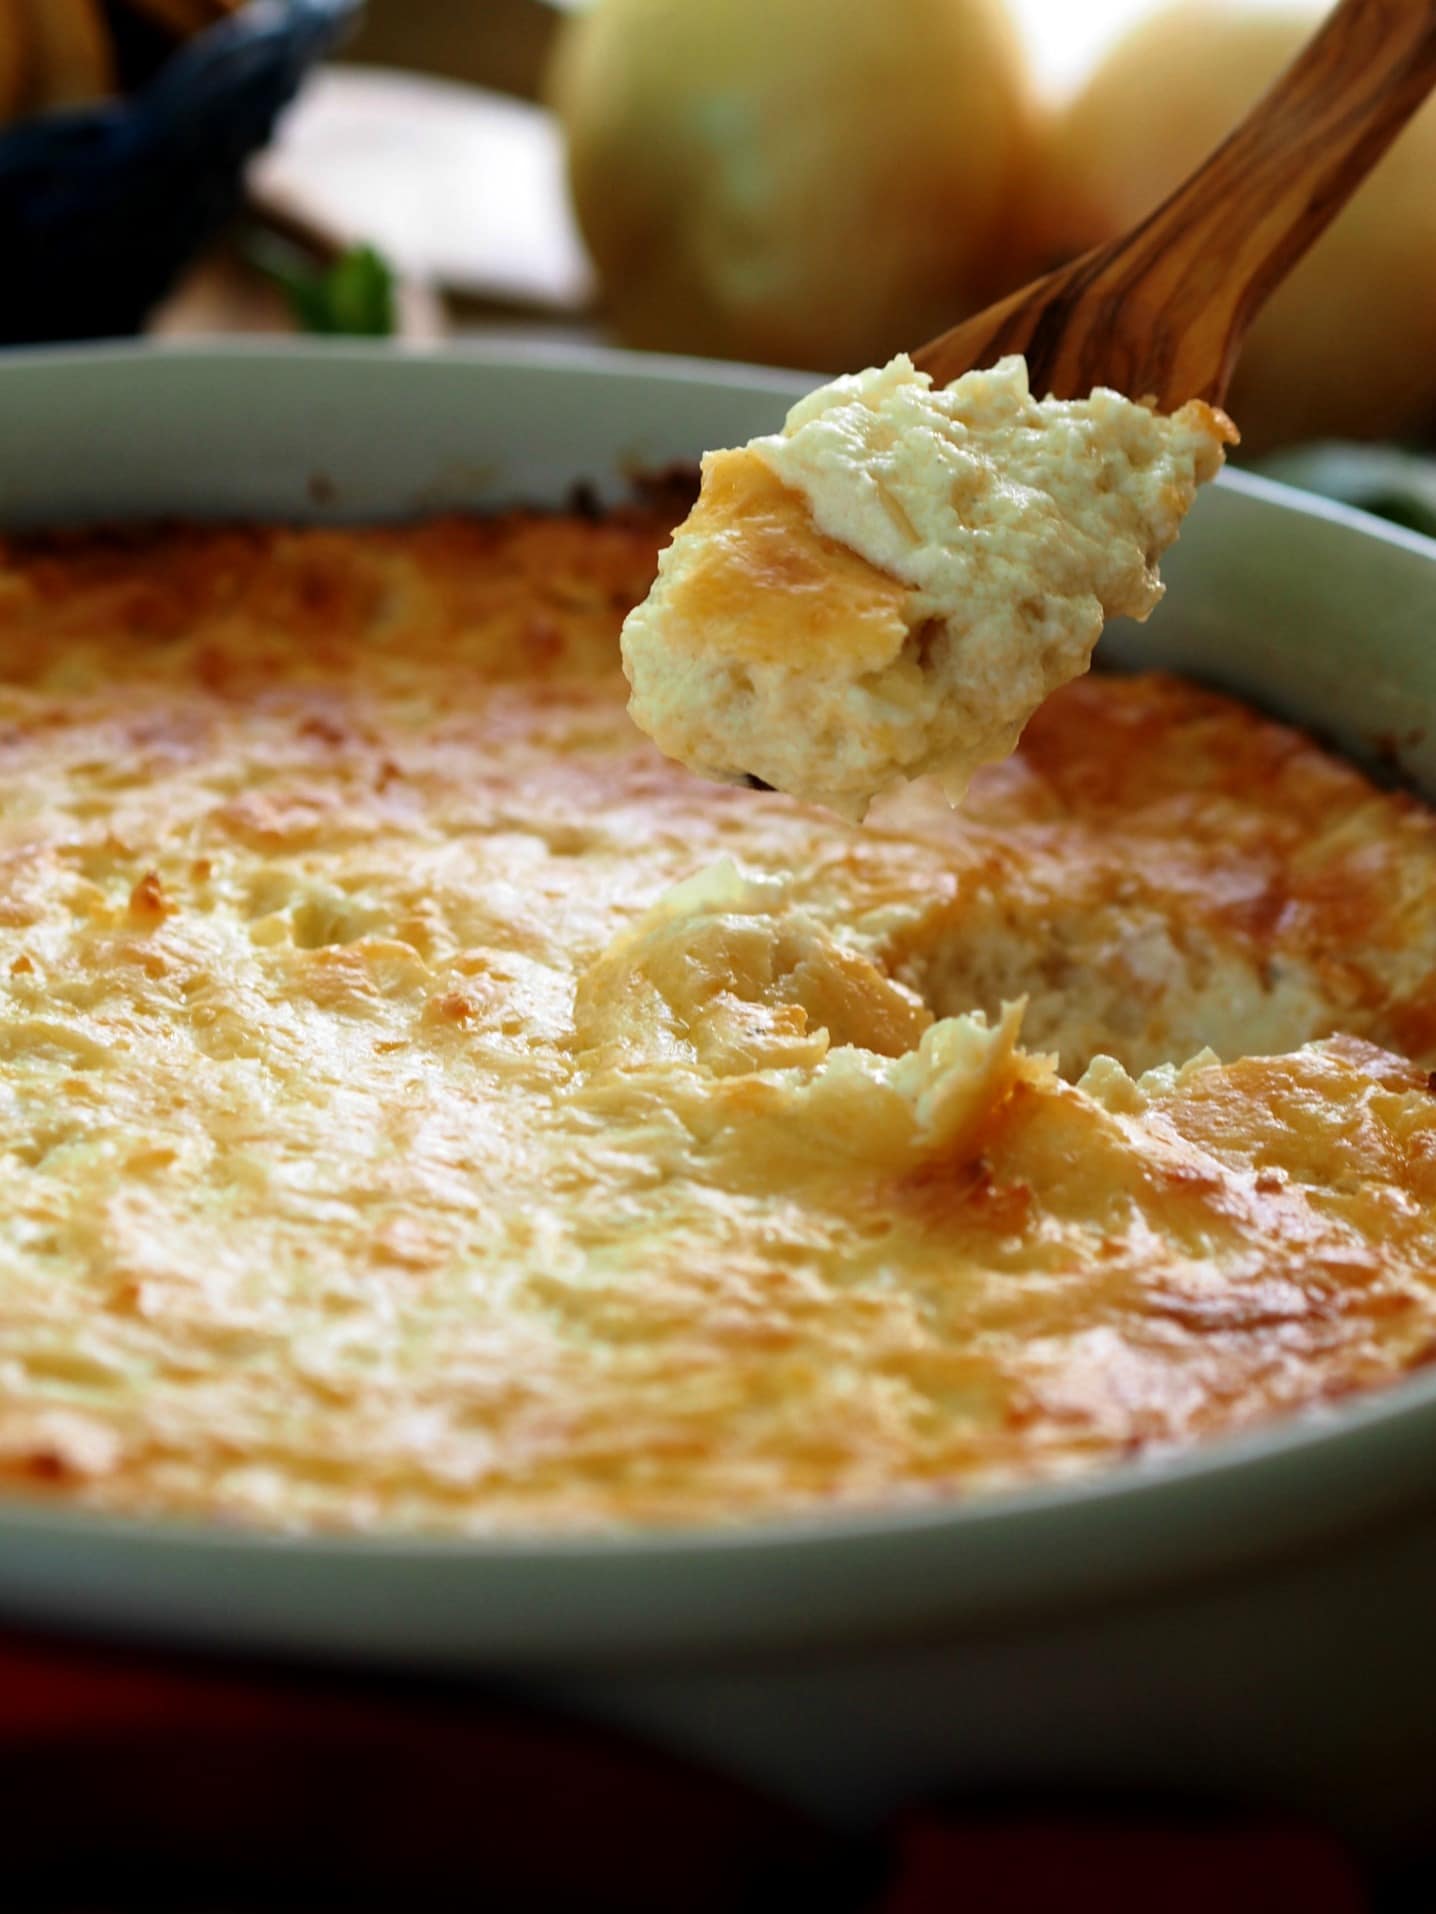 Hot Onion Dip with Boursin. The hot dip food gods decided to create the best dip ever, and this is the result.